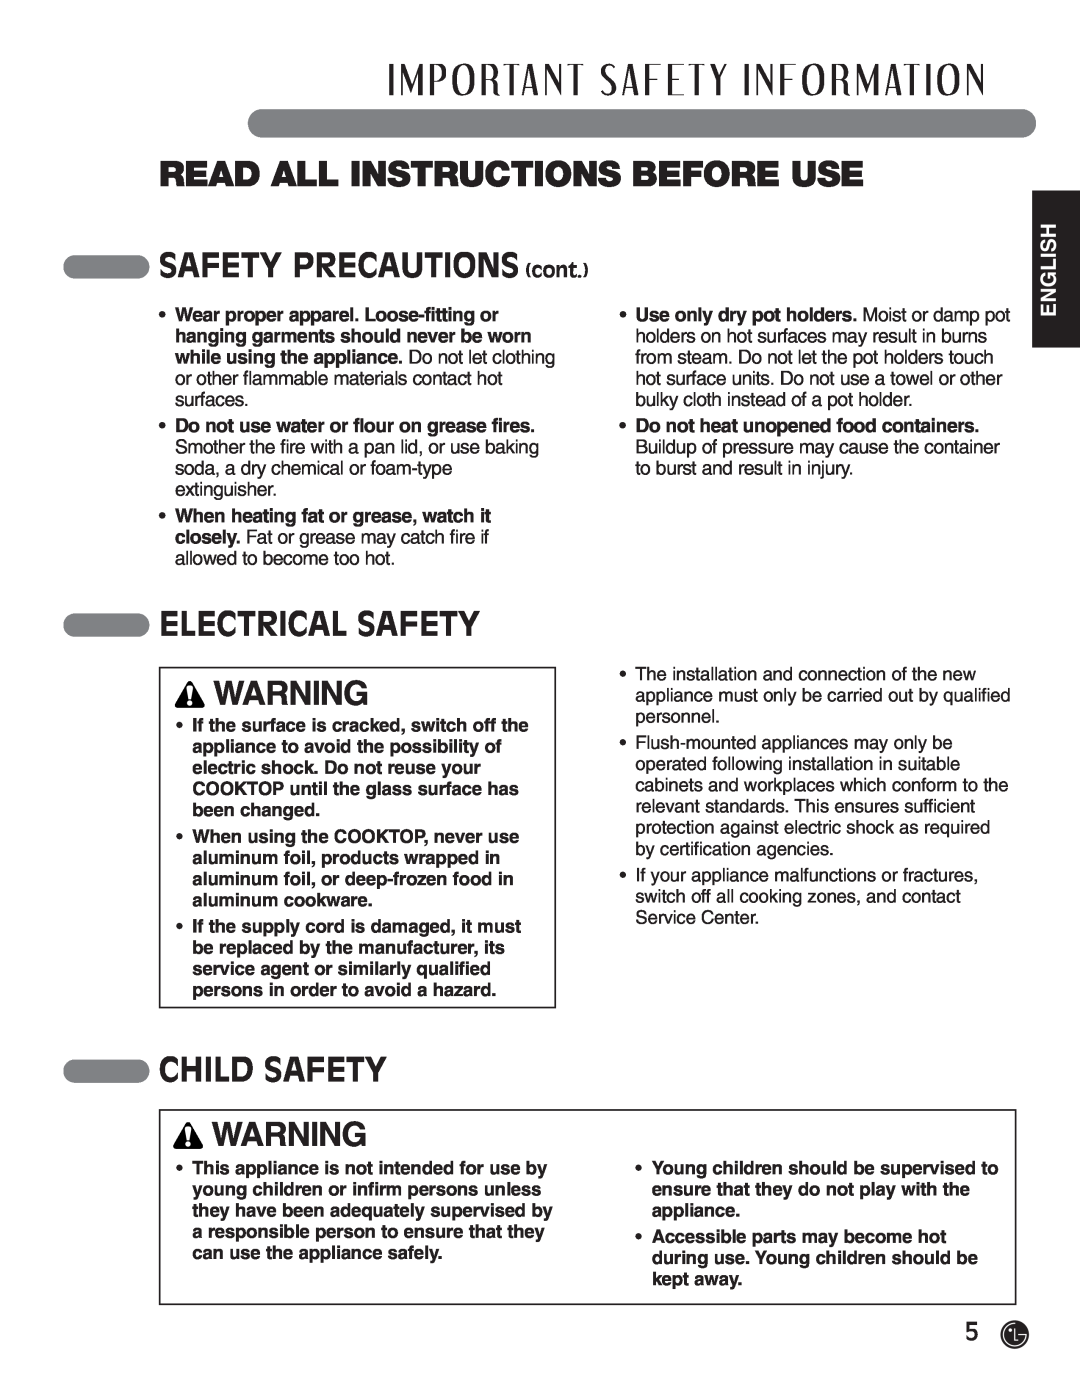 LG Electronics HN7413AG SAFETY PRECAUTIONS cont, Electrical Safety, Child Safety, Read All Instructions Before Use 